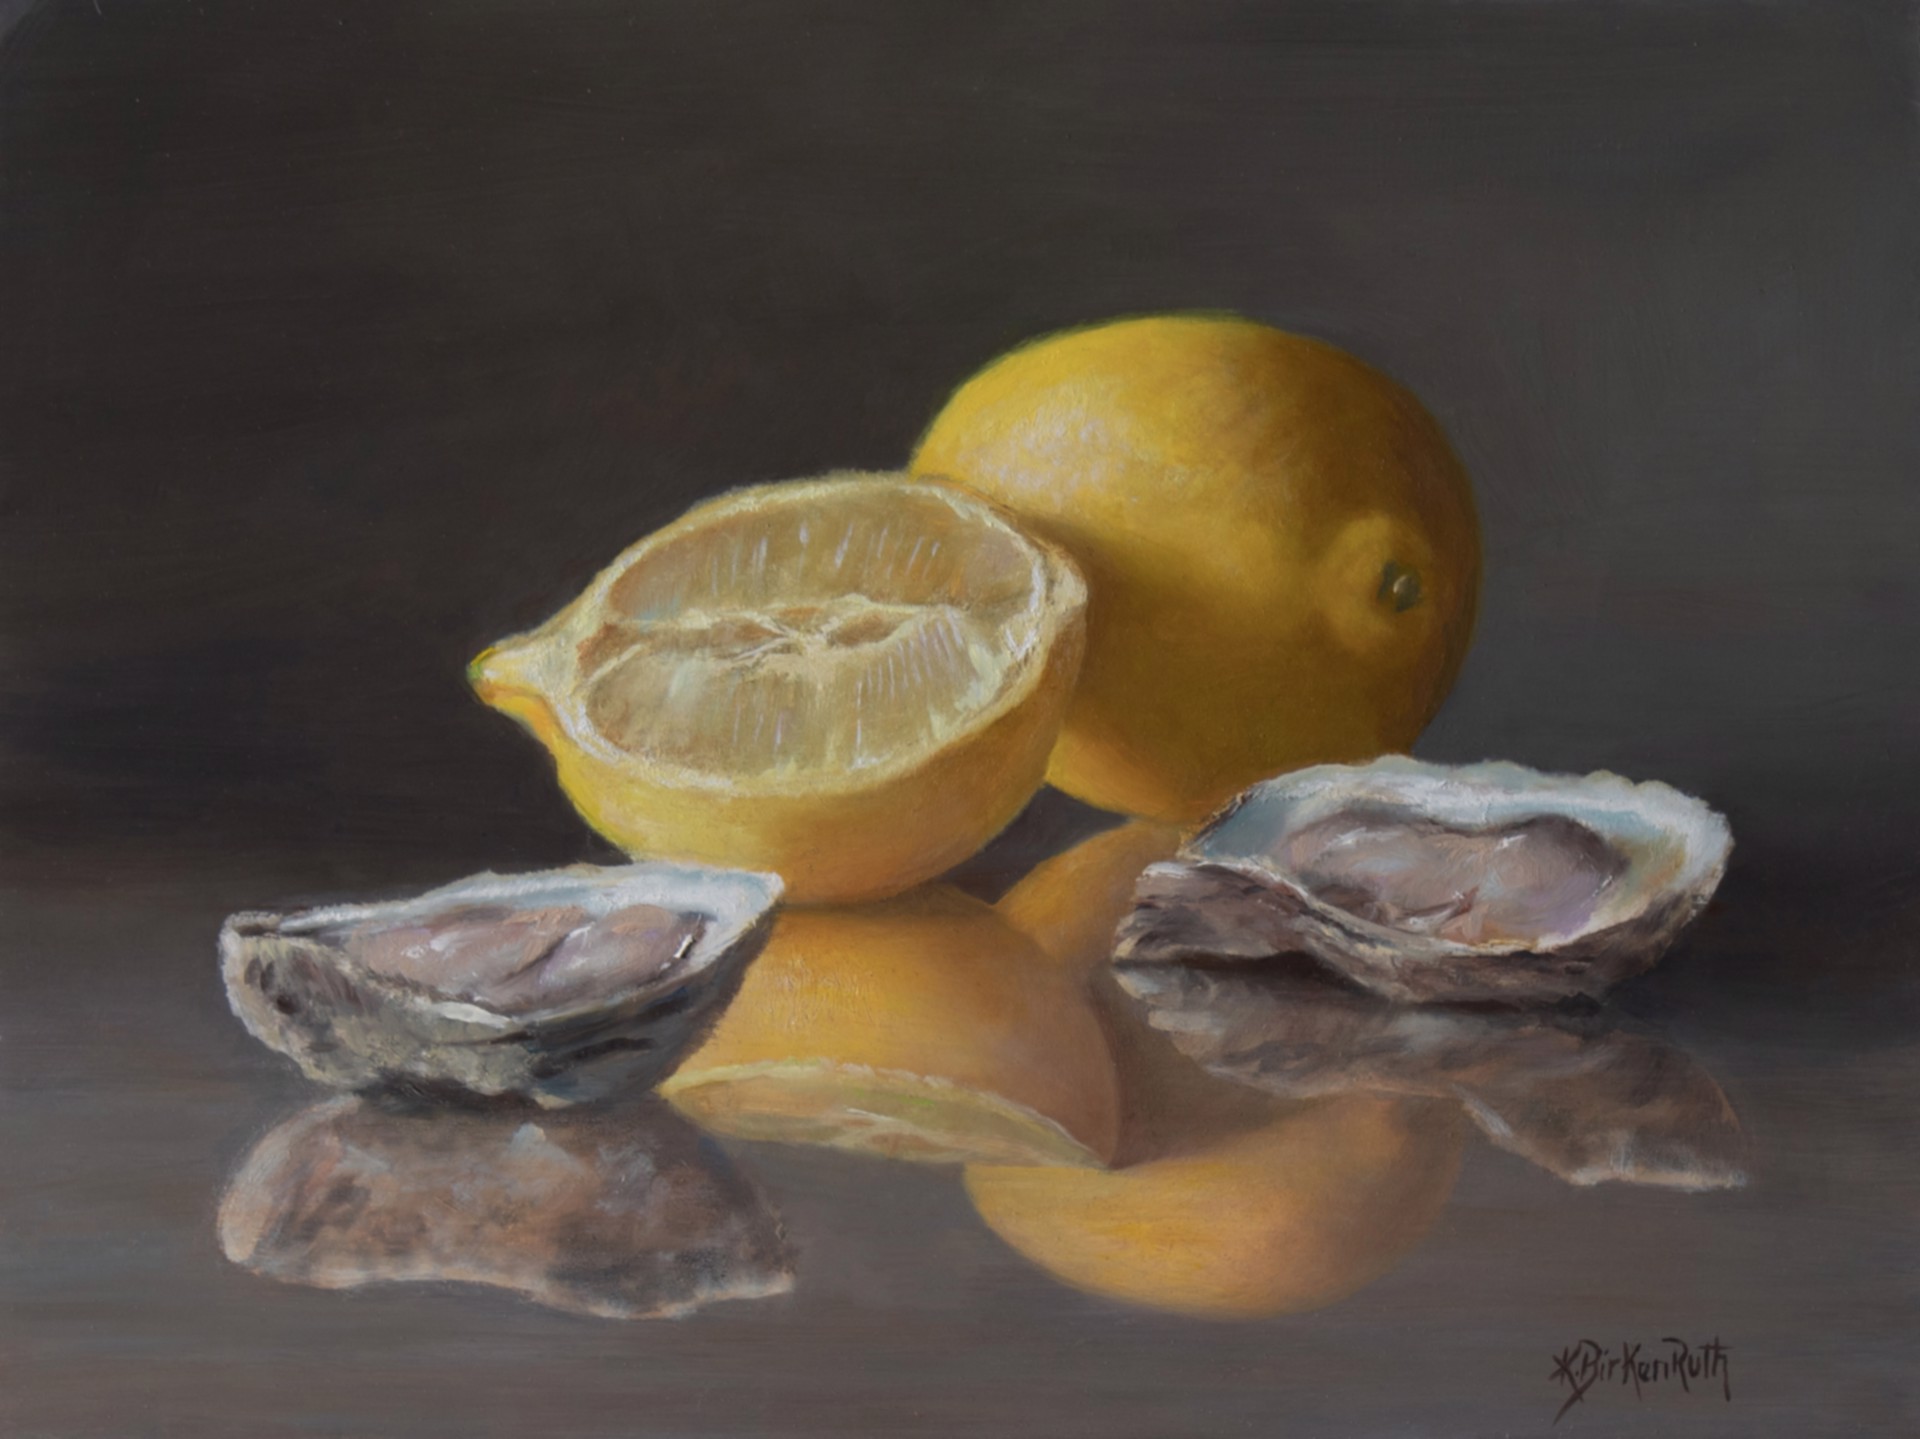 Oysters and Lemons by Kelly Birkenruth